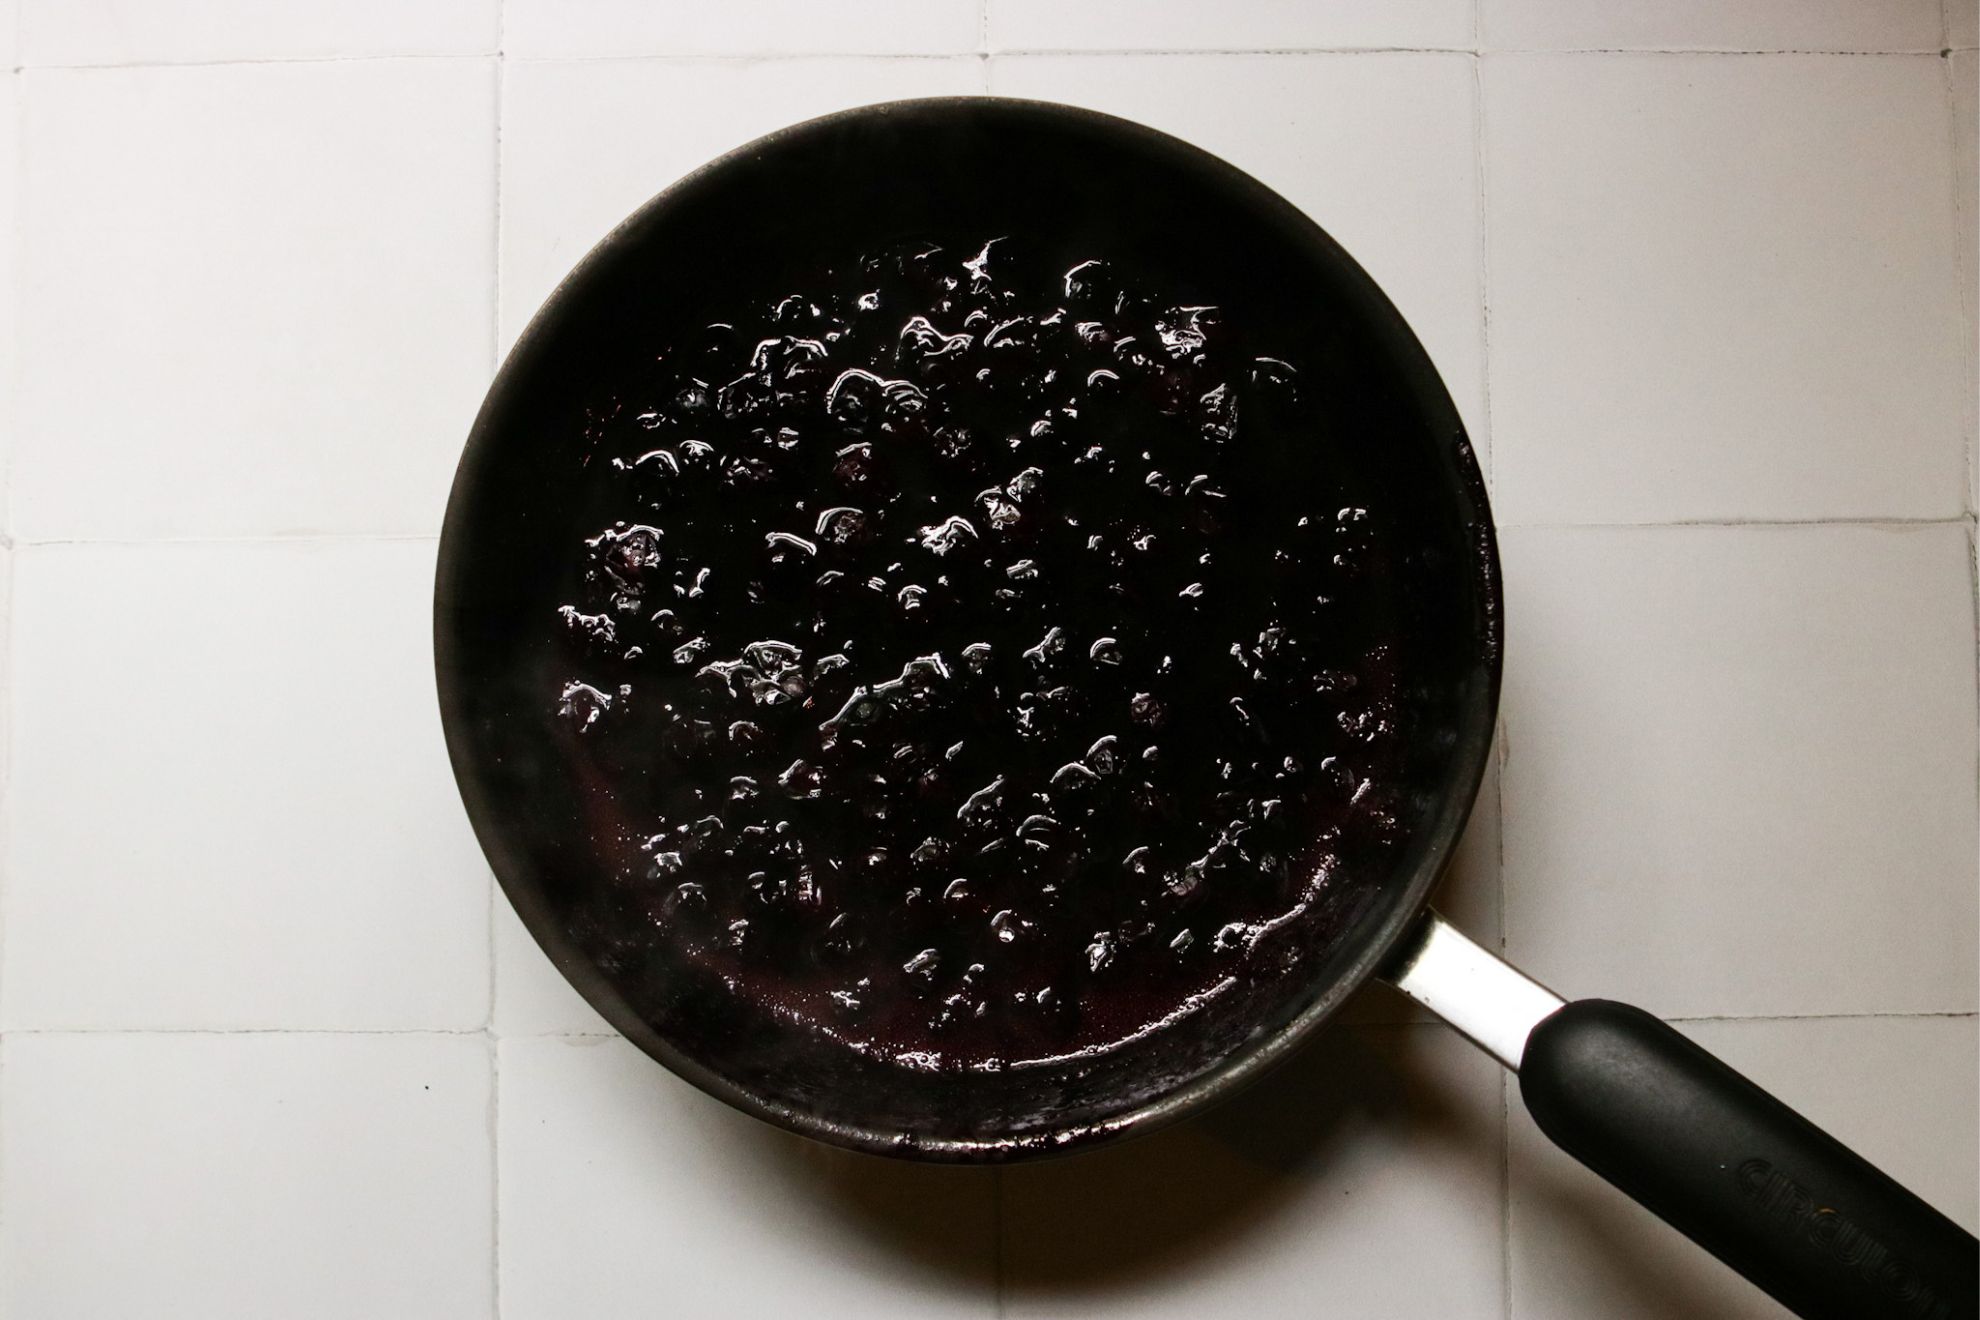 This is an overhead horizontal image of a small saucepan with a reduced berry glaze in it. The handle of the pan is pointing to the bottom right corner of the image. The pan sits on a white square tile surface.